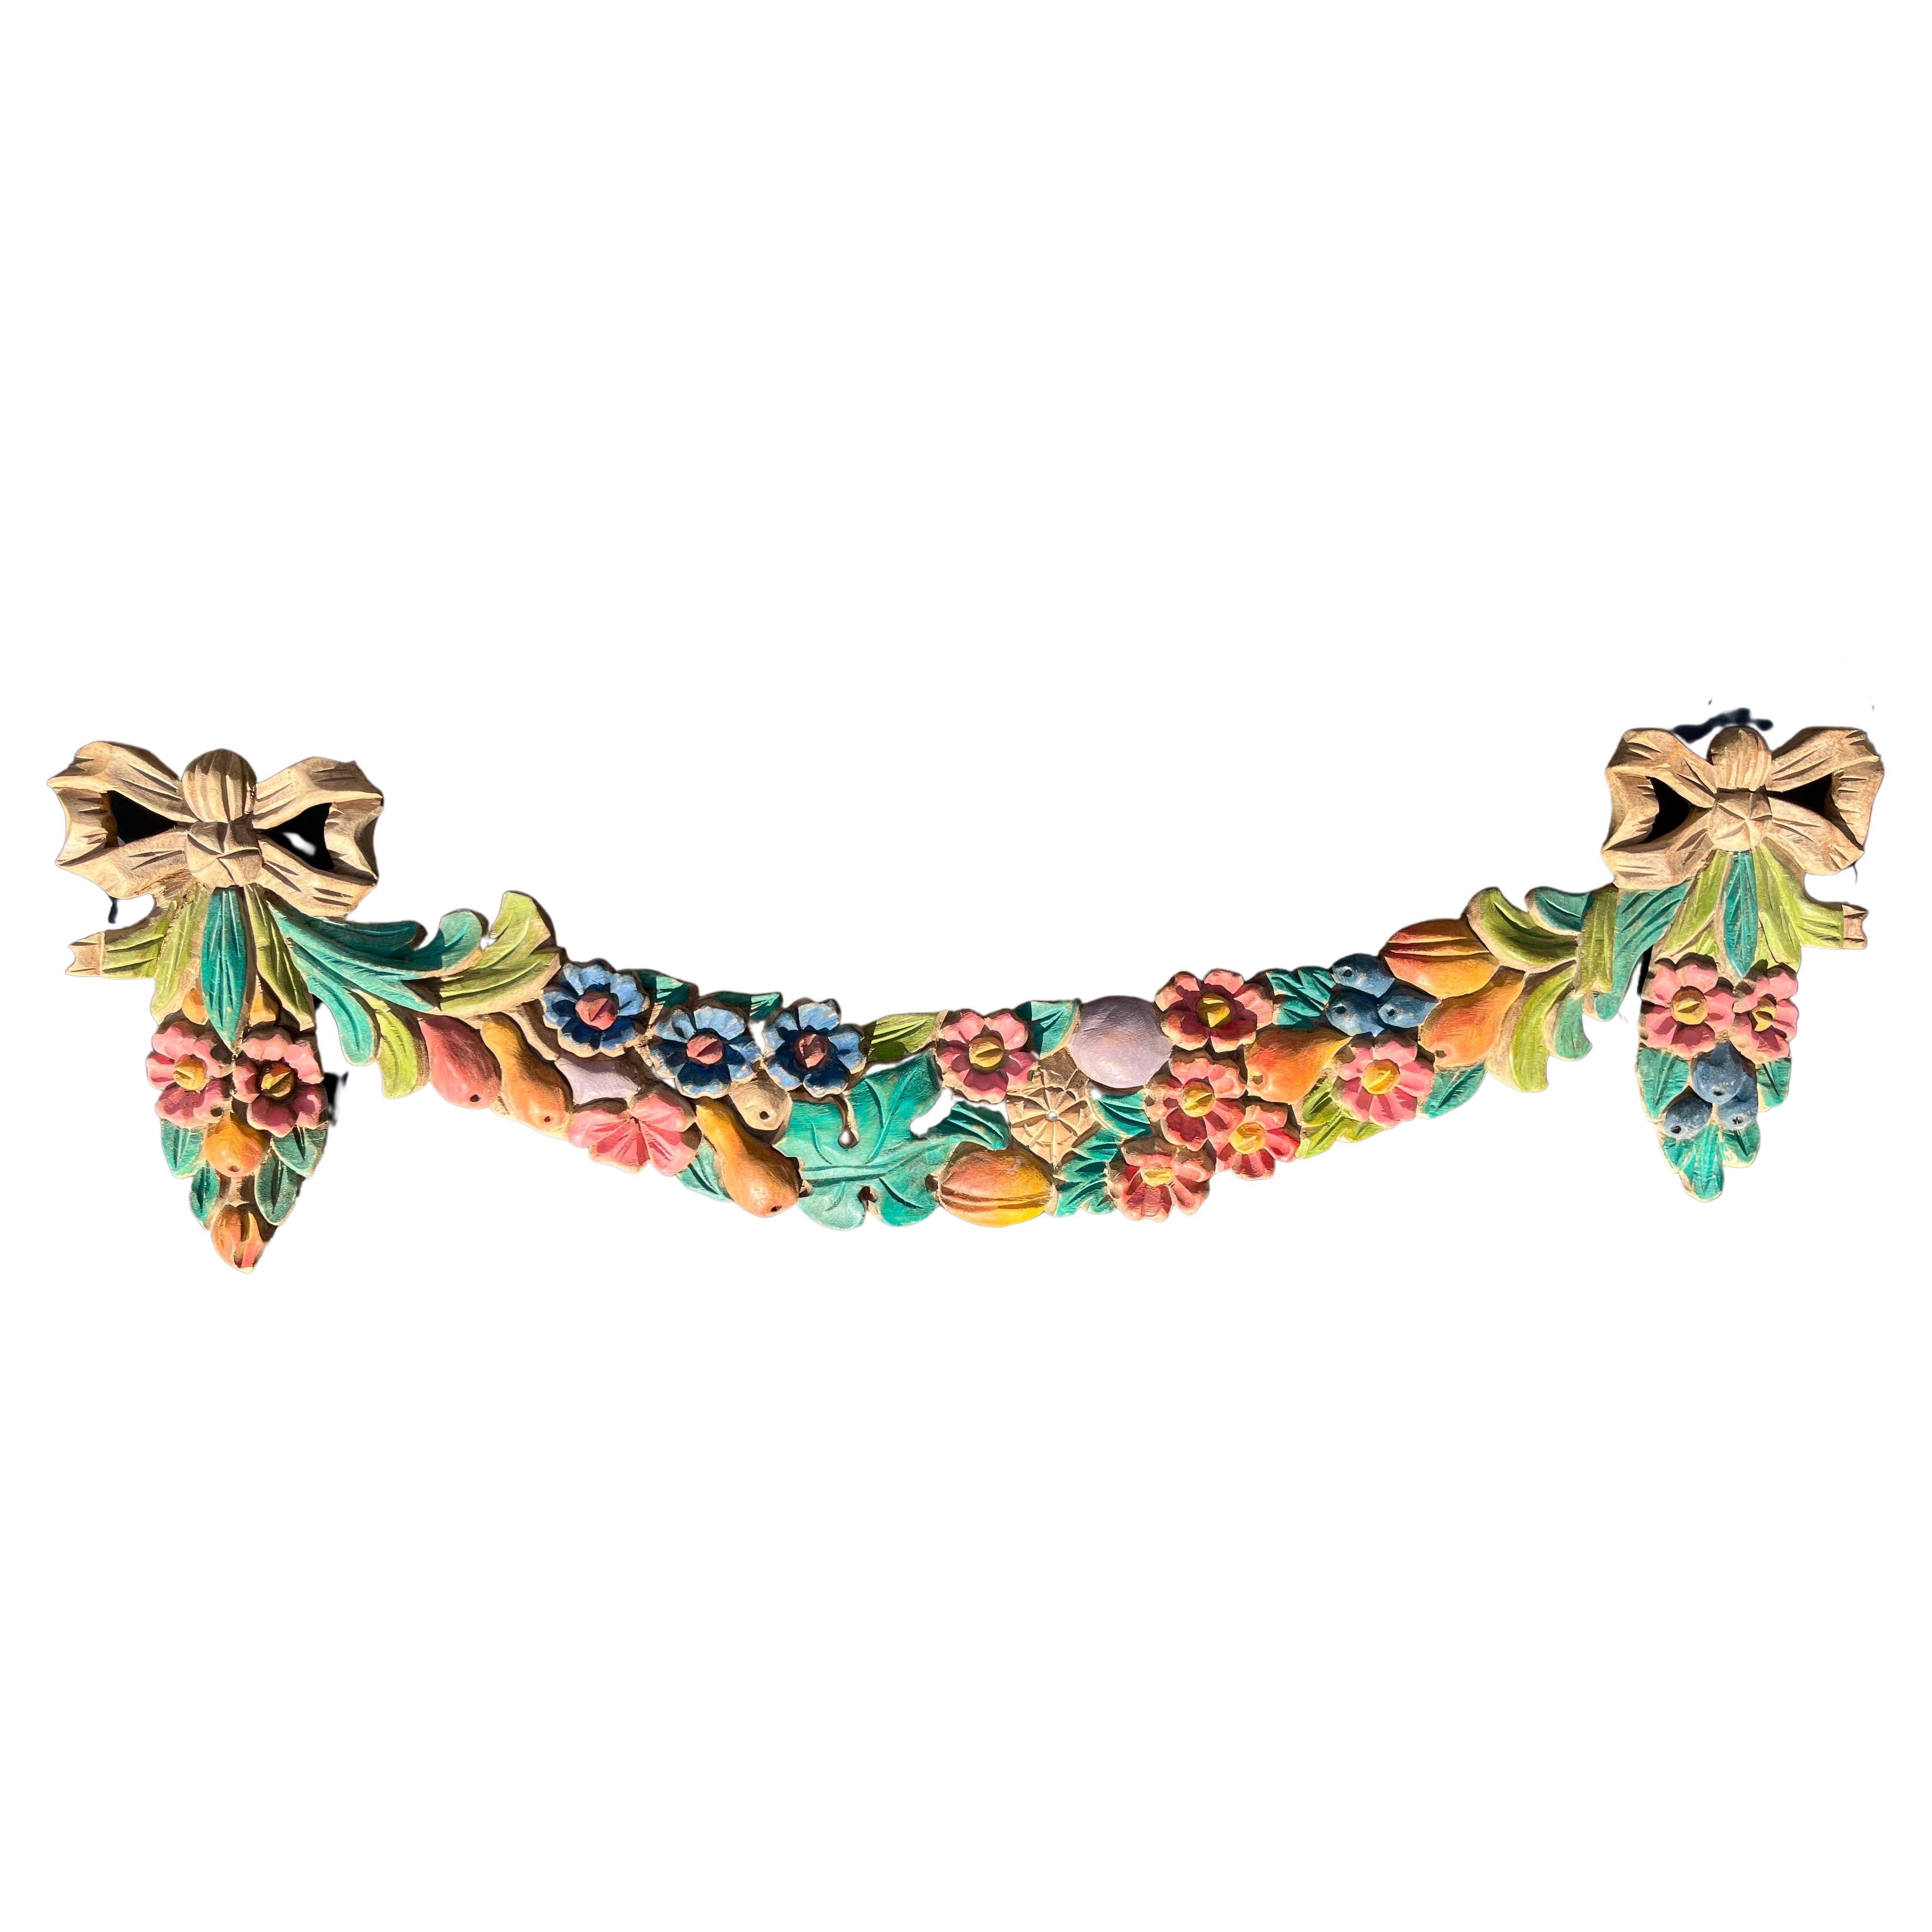 Polychromed Classical Styled Carved Garland or Festoon 